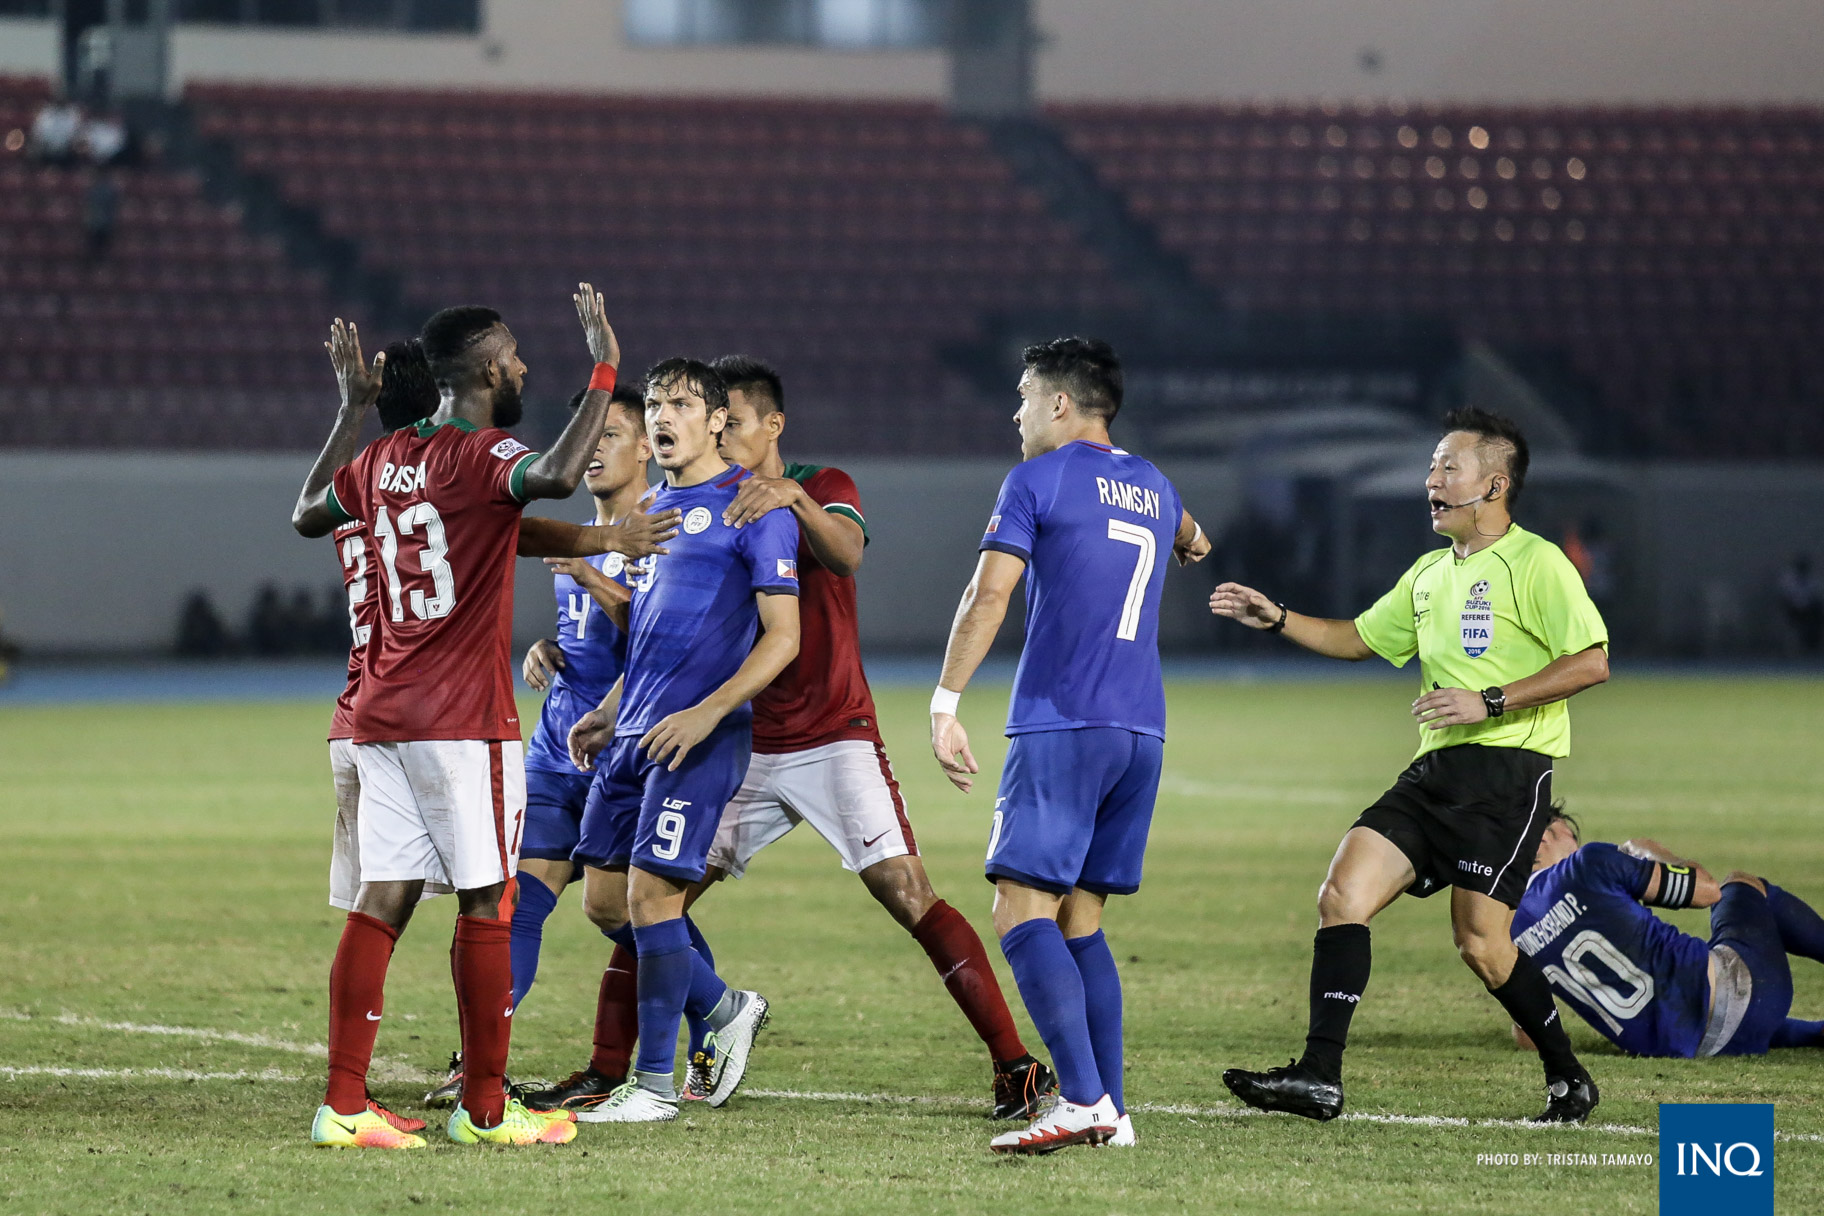 AFF Suzuki Cup game between Philippines and Indonesia. Photo by Tristan Tamayo/INQUIRER.net